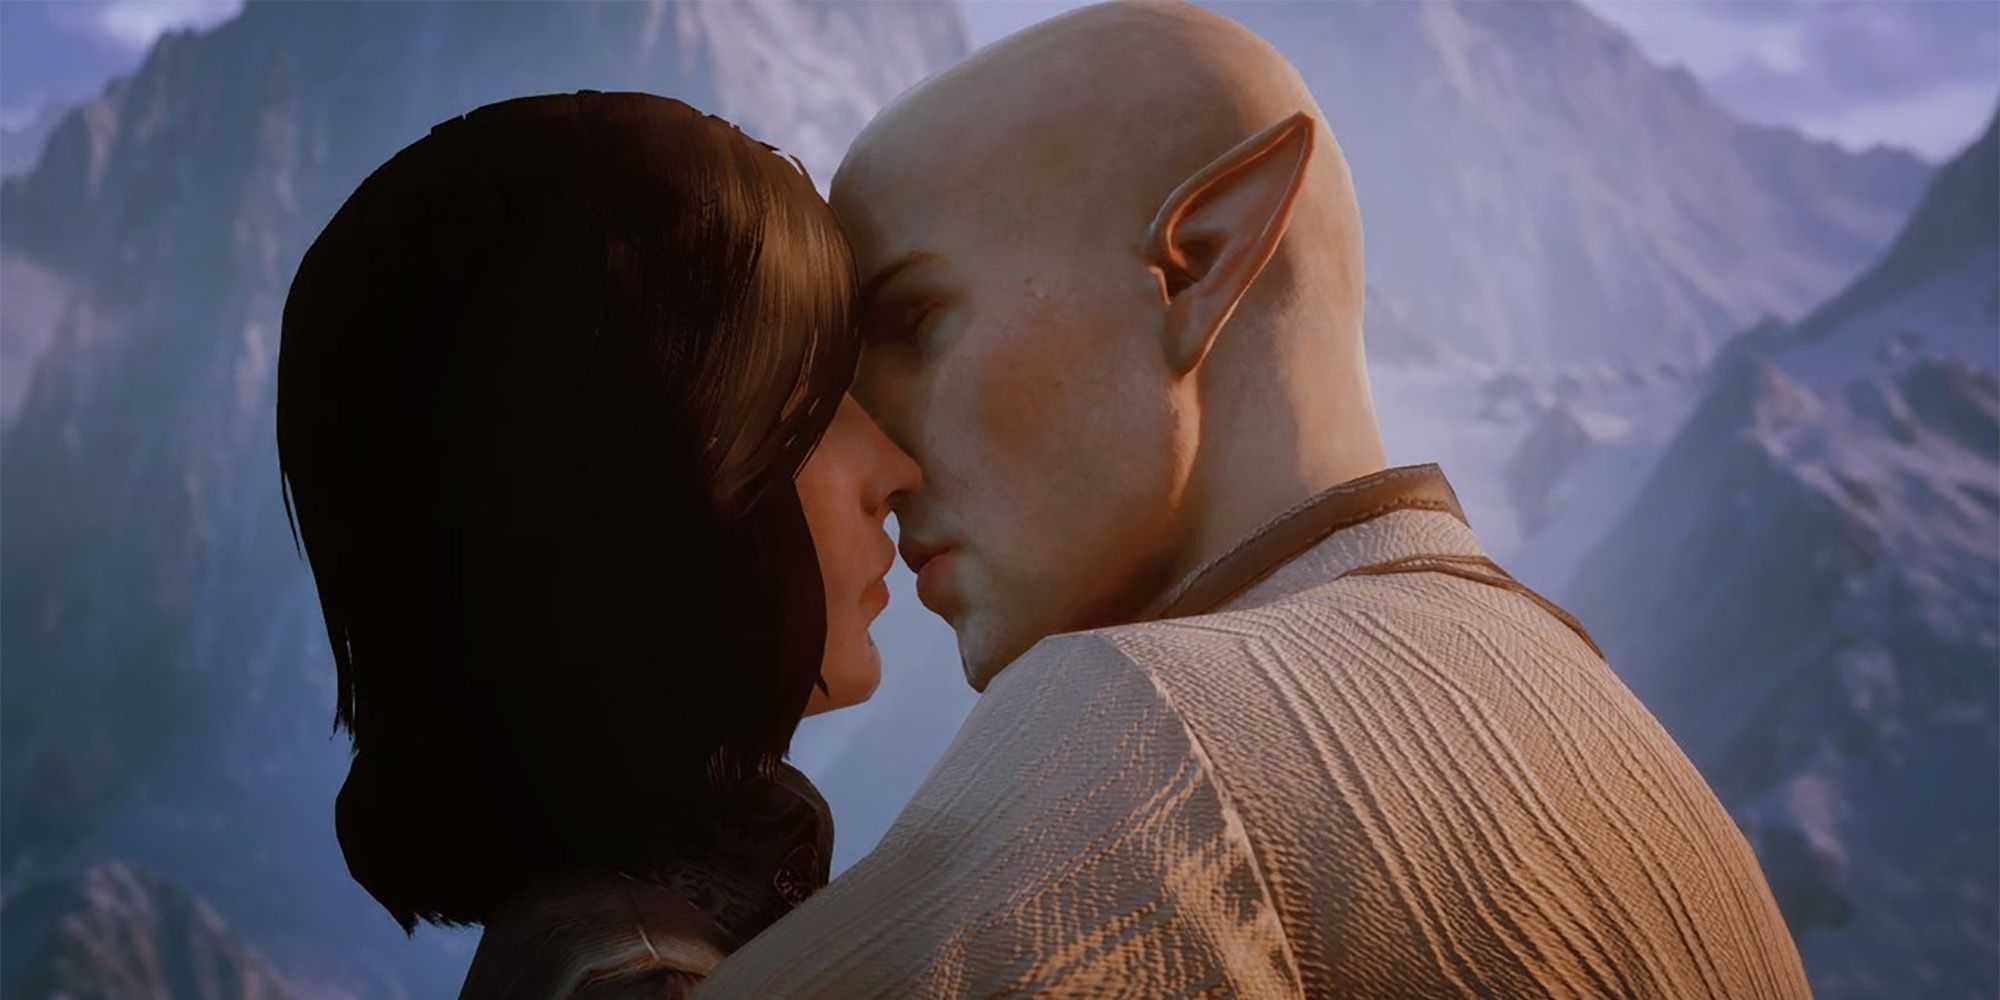 Hug your companions in Dragon Age: Inquisition